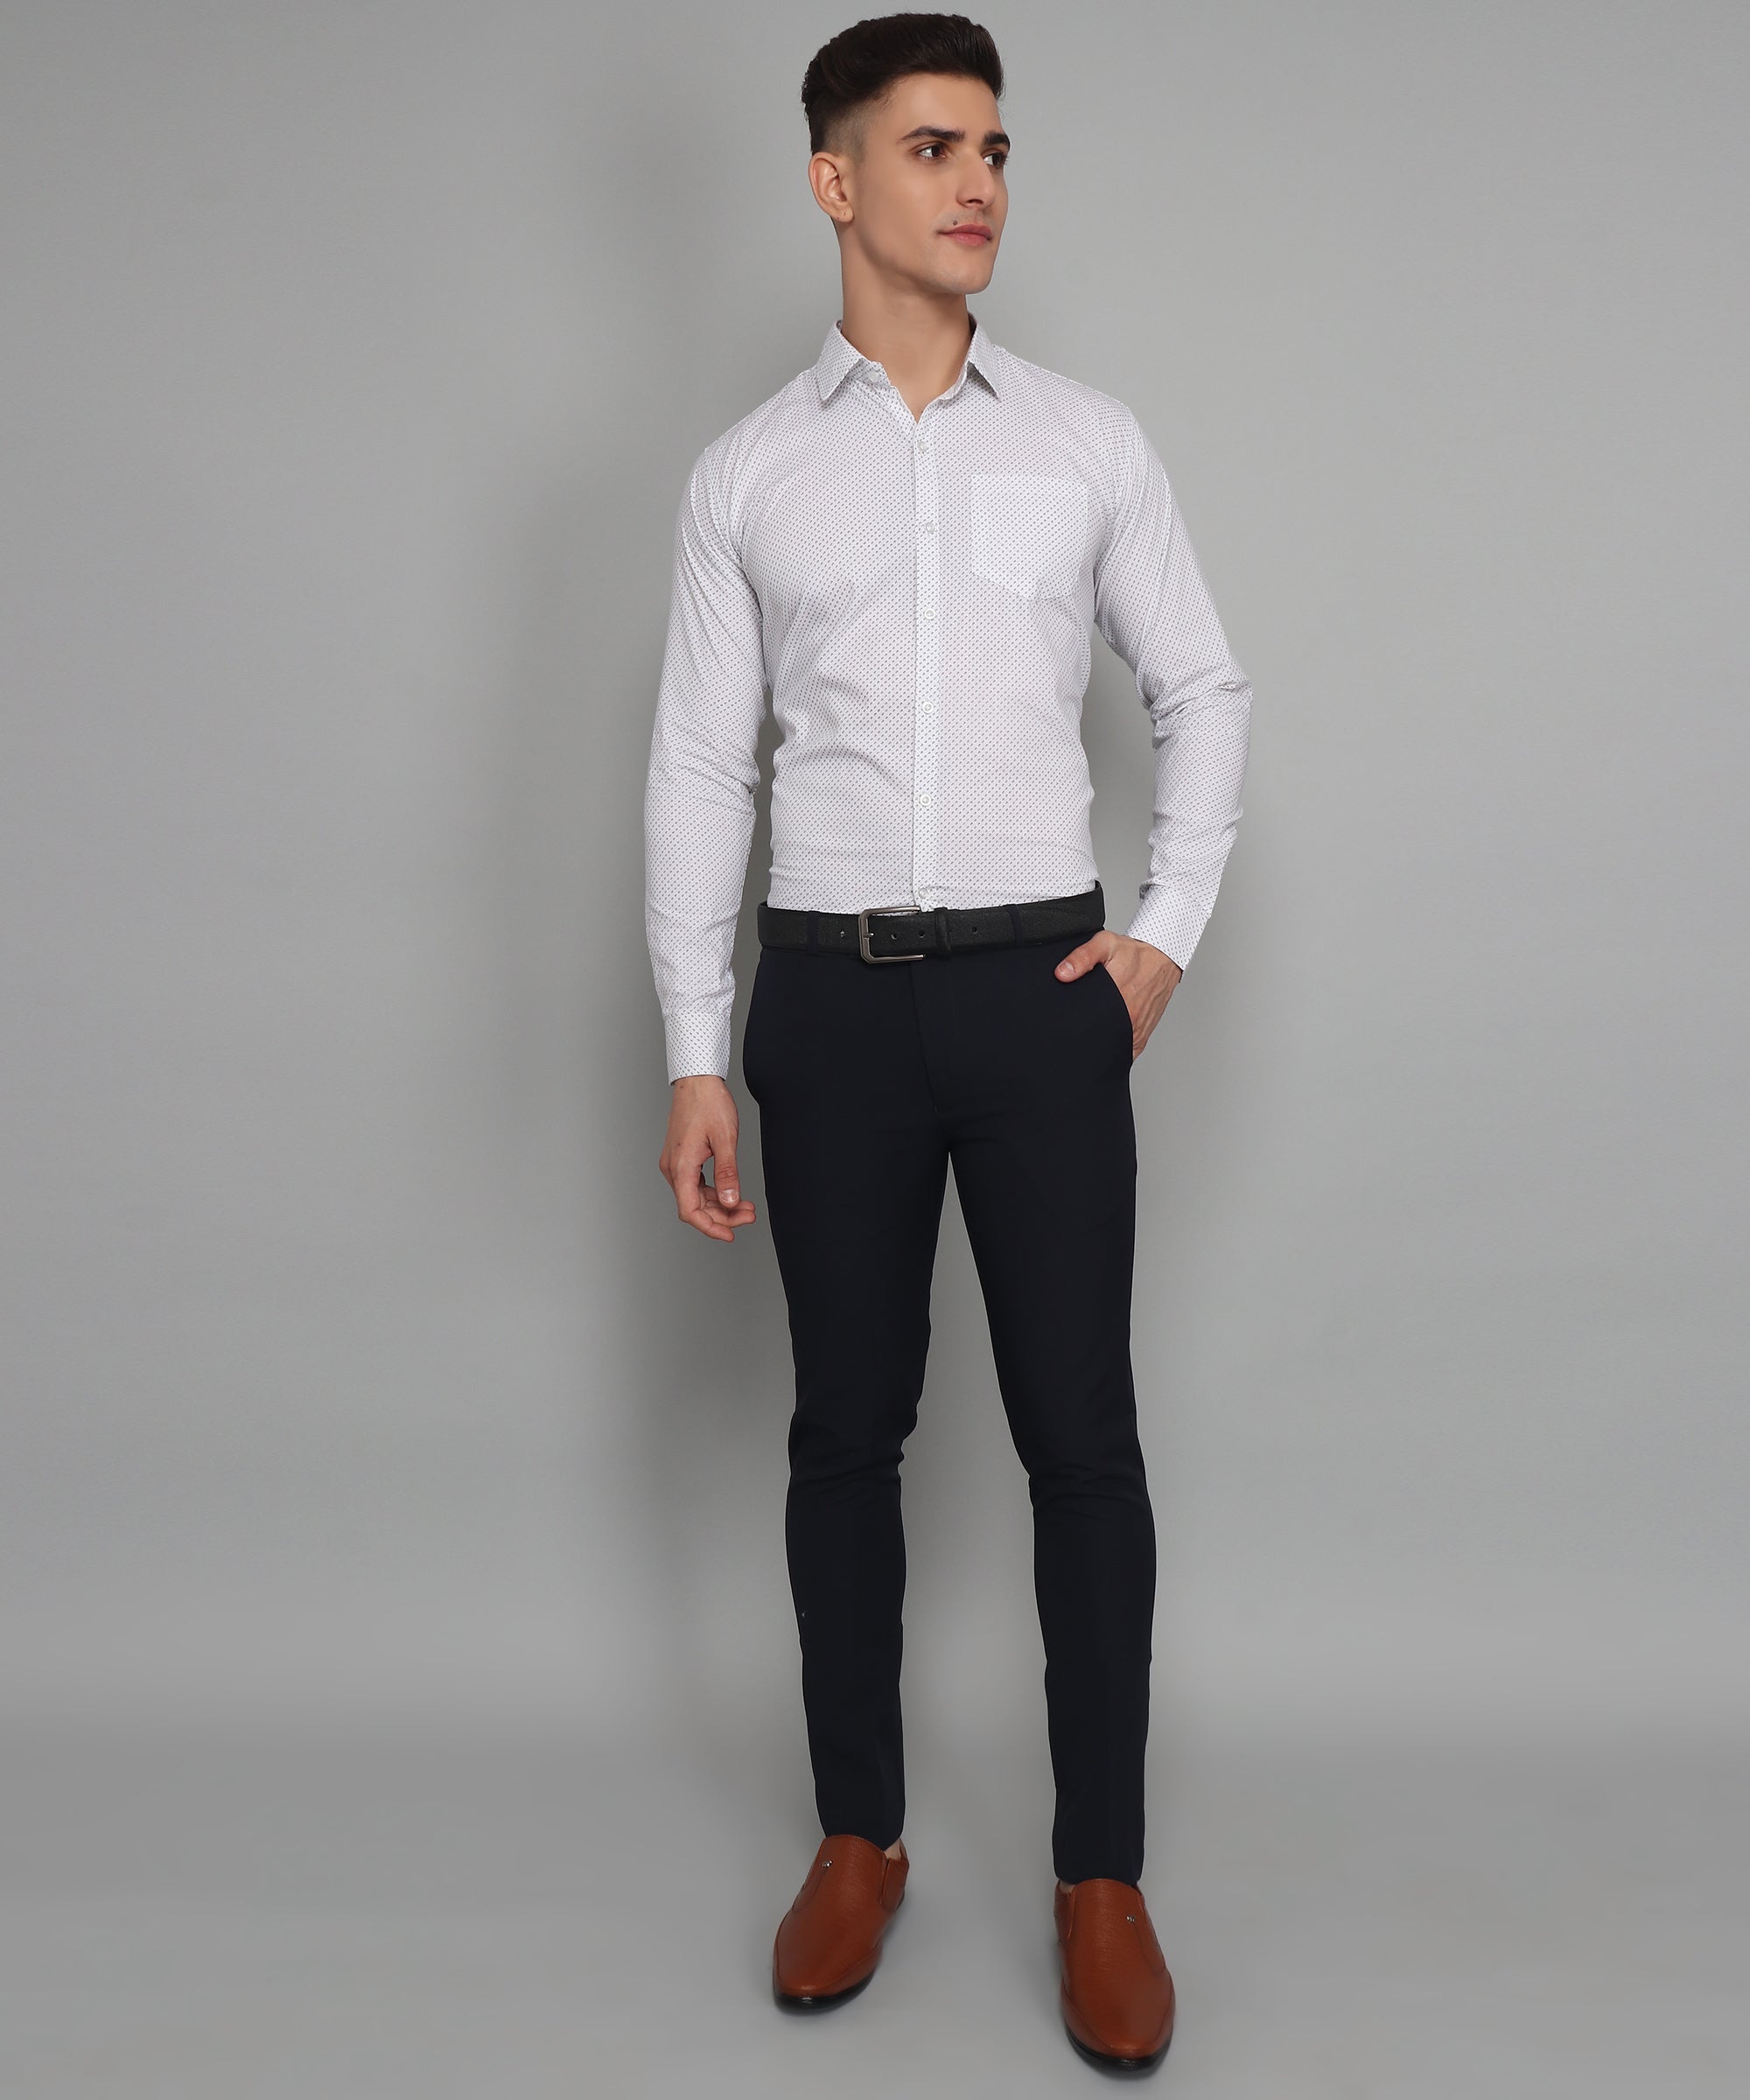 Crafted Comfort: The Allure of Densely Woven Cotton Fabric Shirts